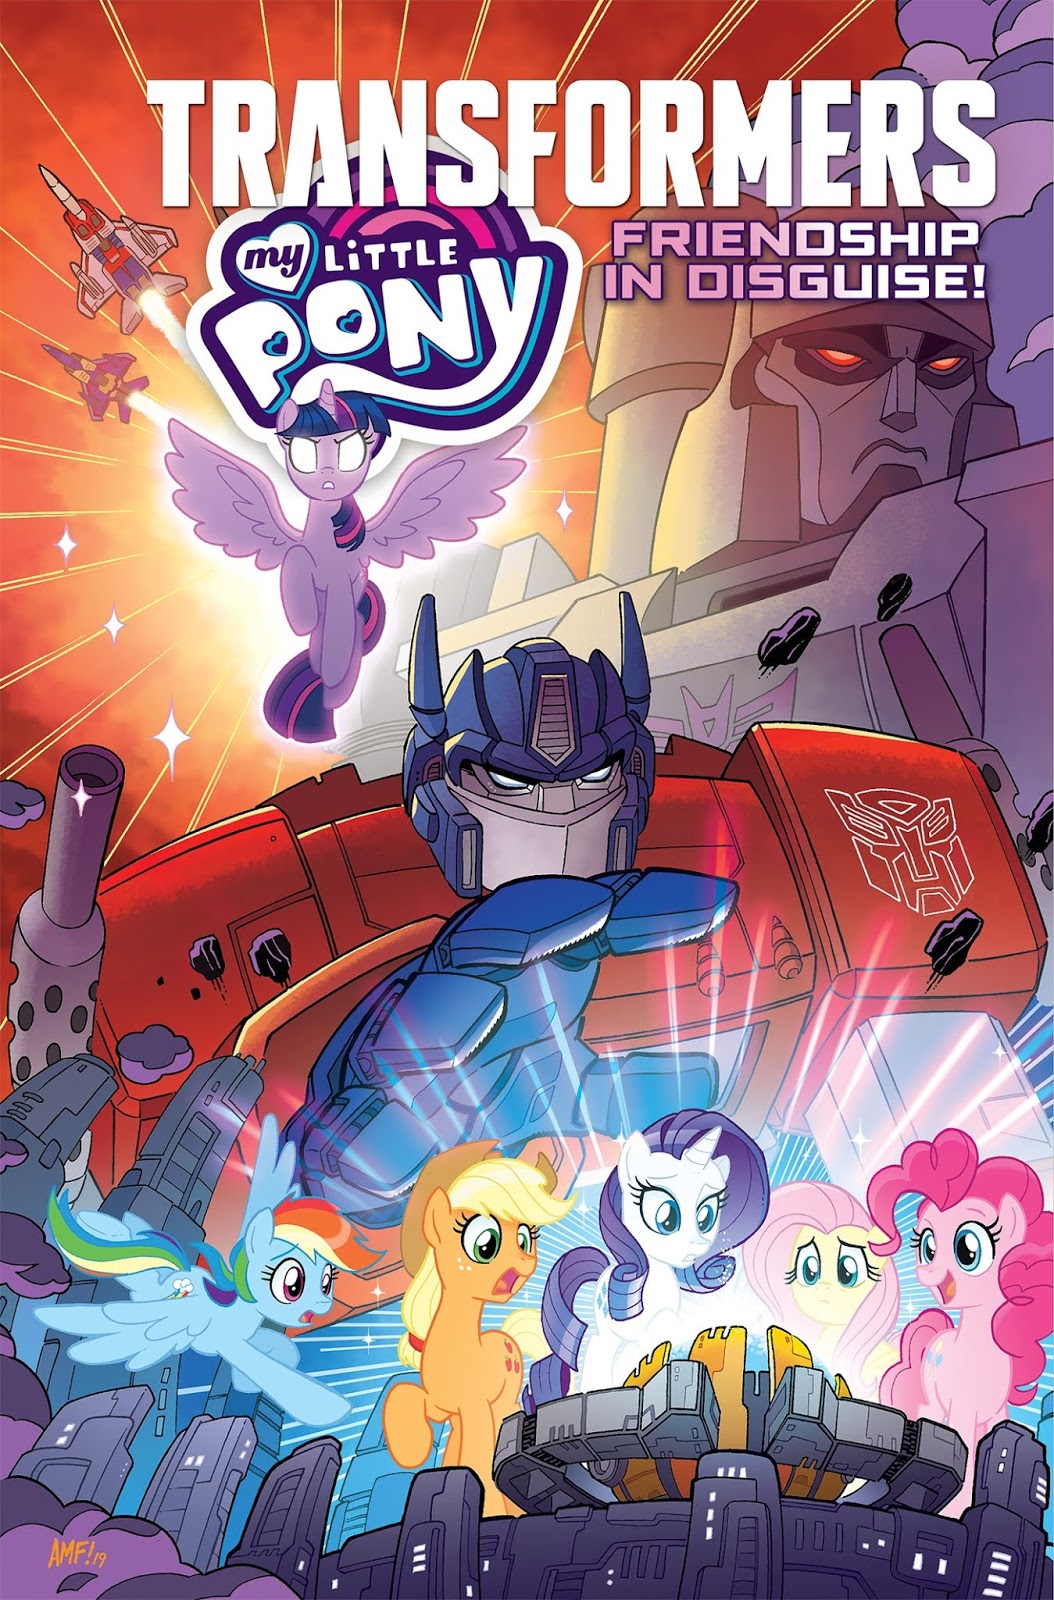 Transformers / My Little Pony: Friendship in Disguise! graphic novel  revealed